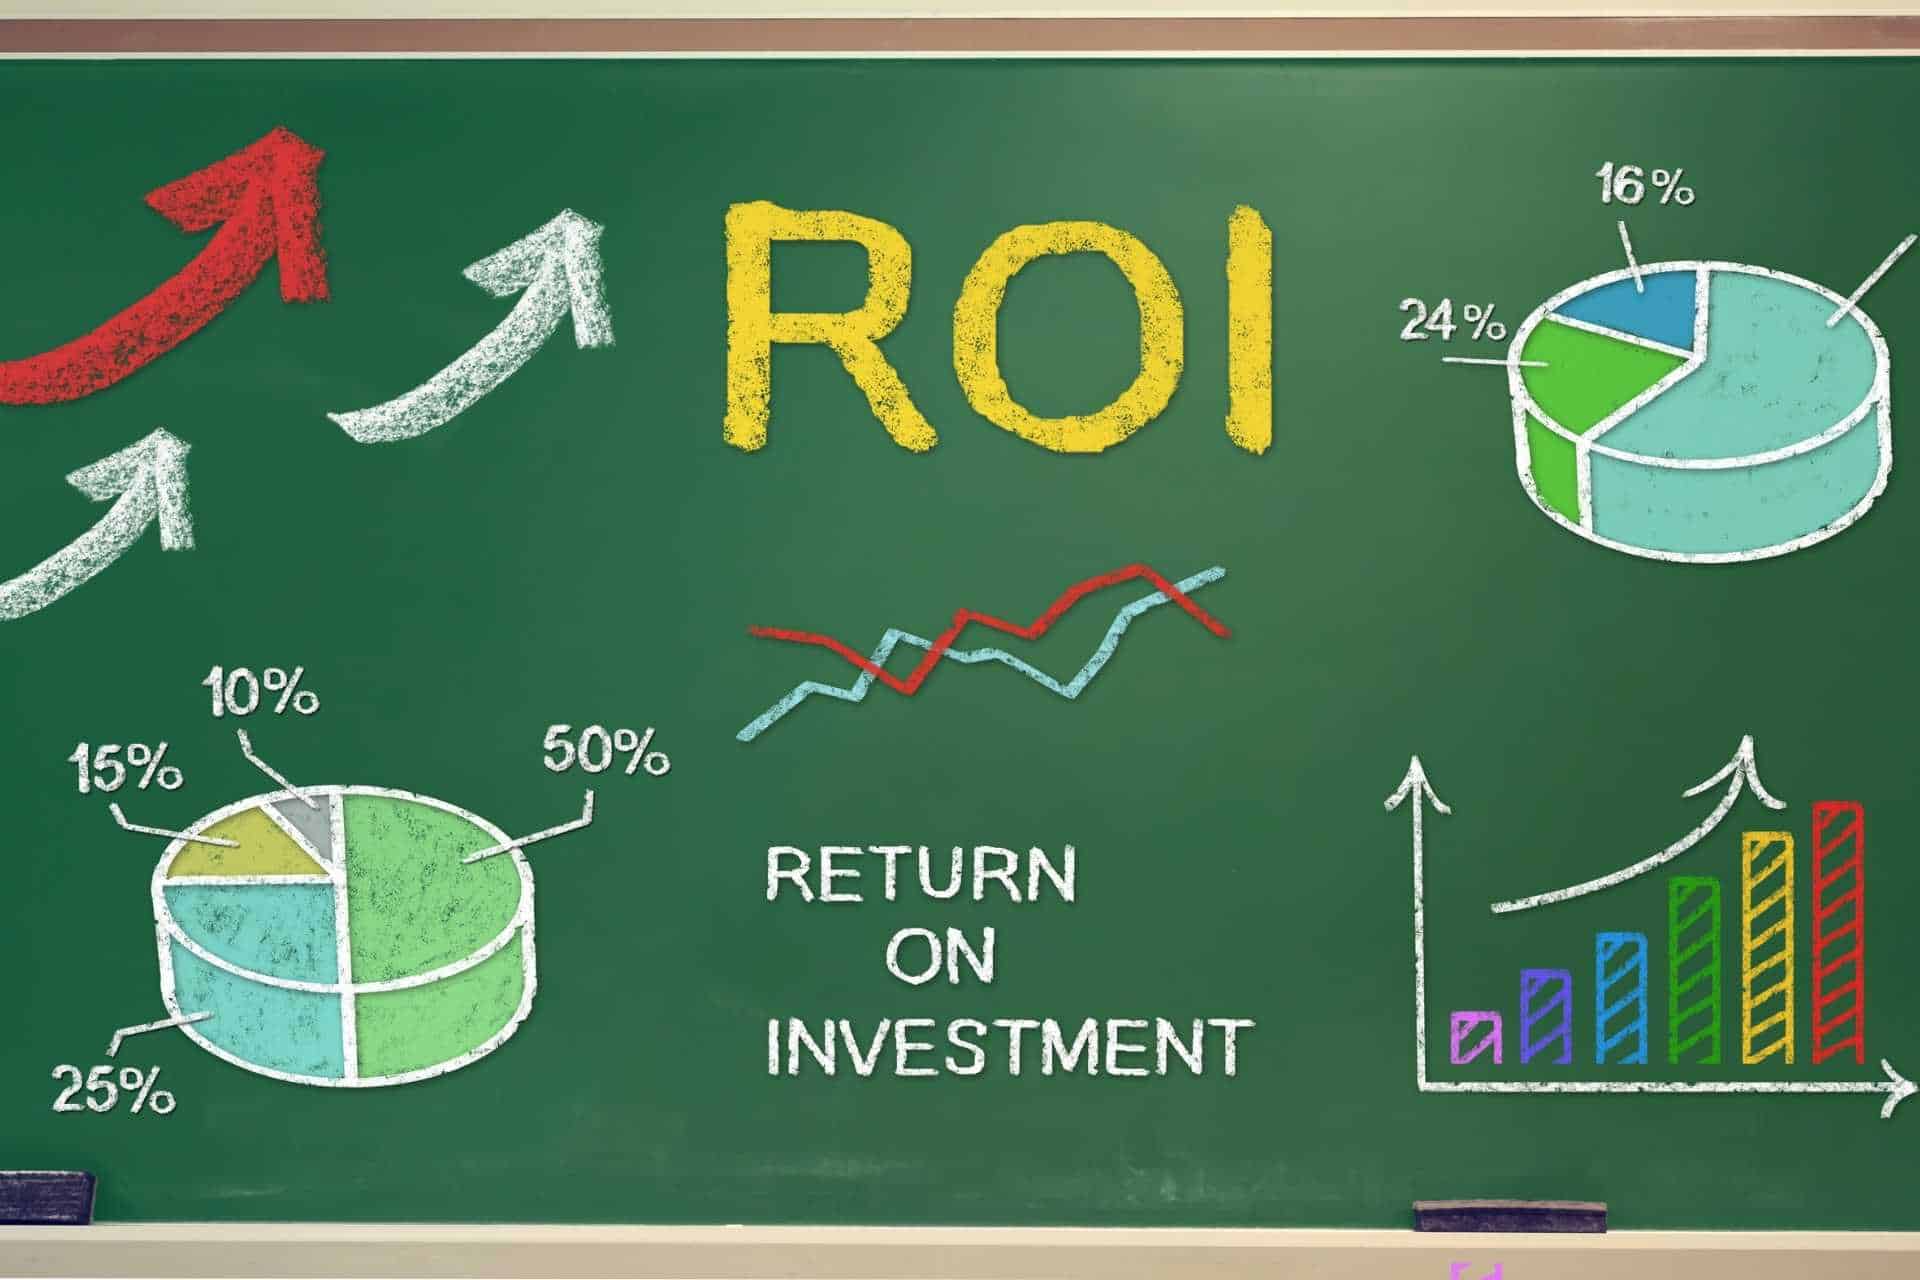 Chalkboard with colorful graphs and the text 'ROI - Return on Investment', featuring pie charts, a line graph, and bar charts to represent statistical analysis, crucial for hotel guest journey mapping to maximize return on investment in the hospitality industry.